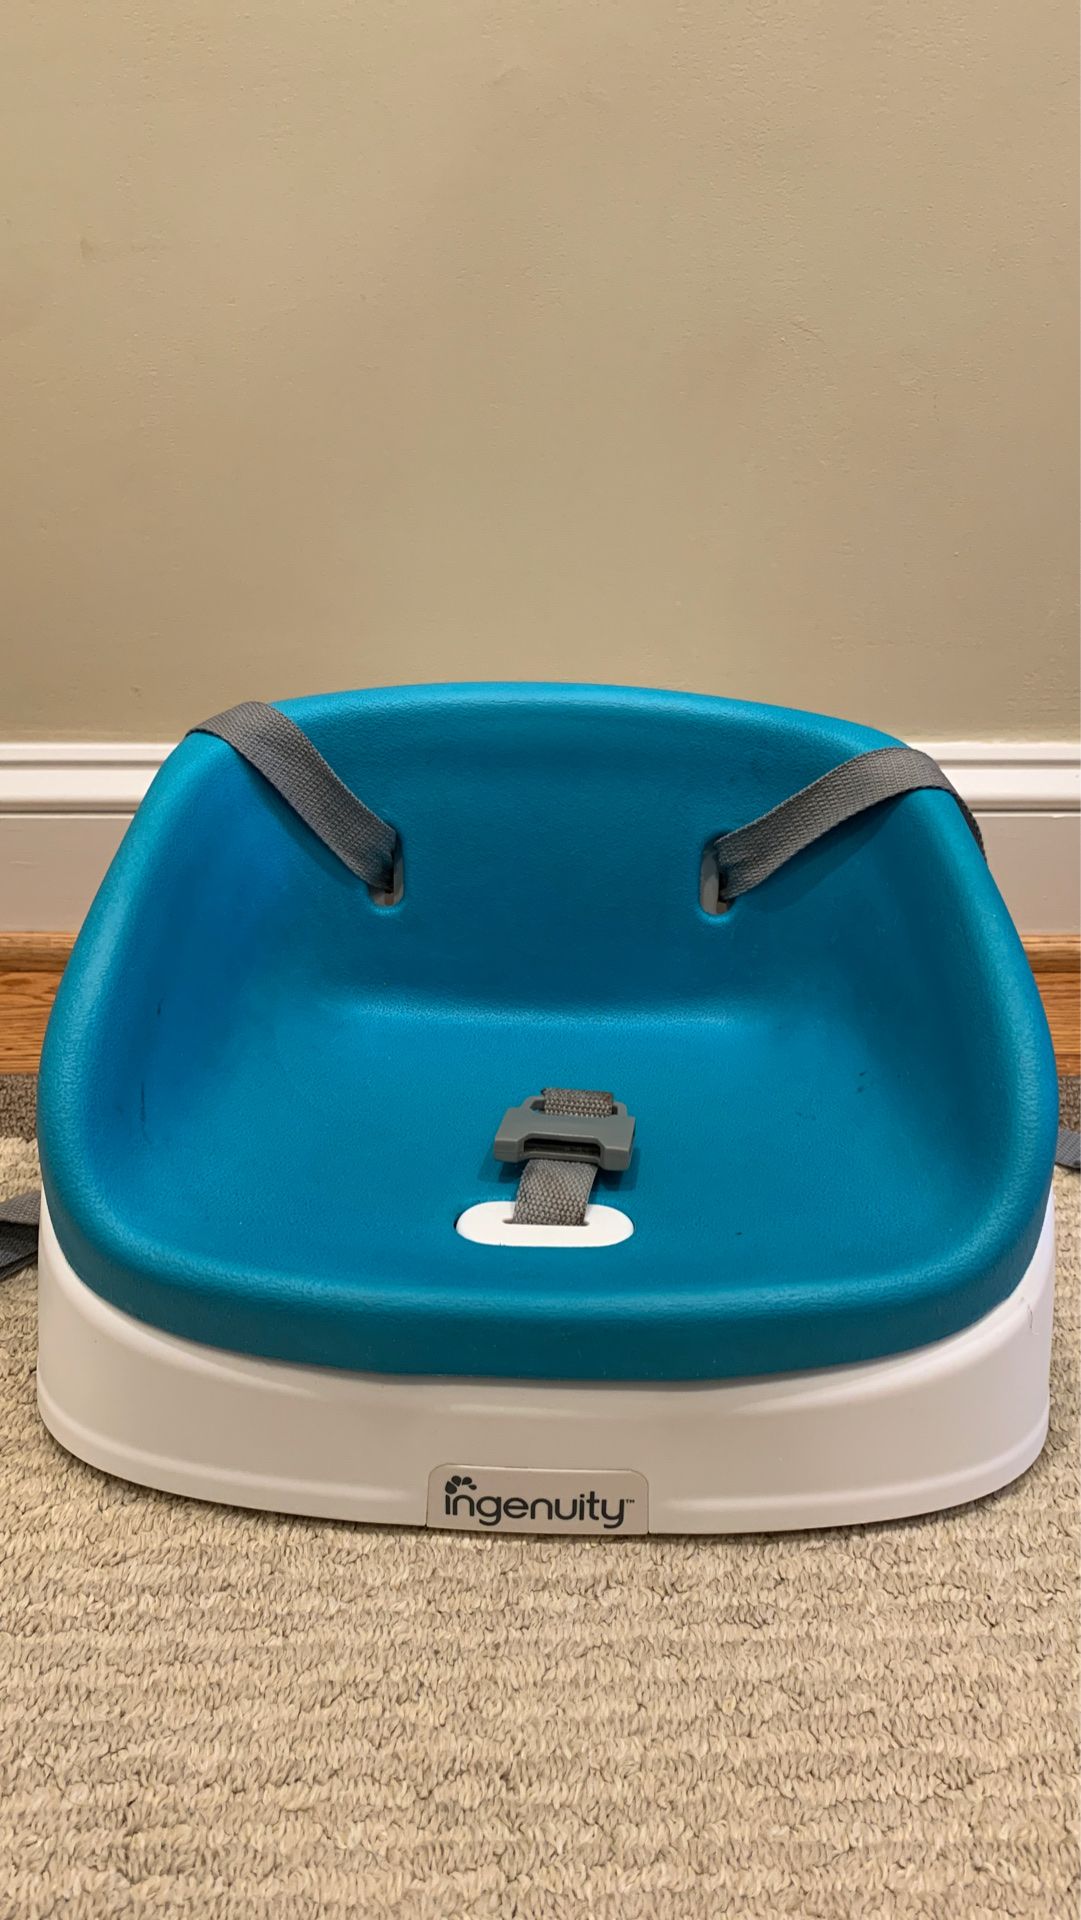 Blue booster seat for kitchen or dining room chair